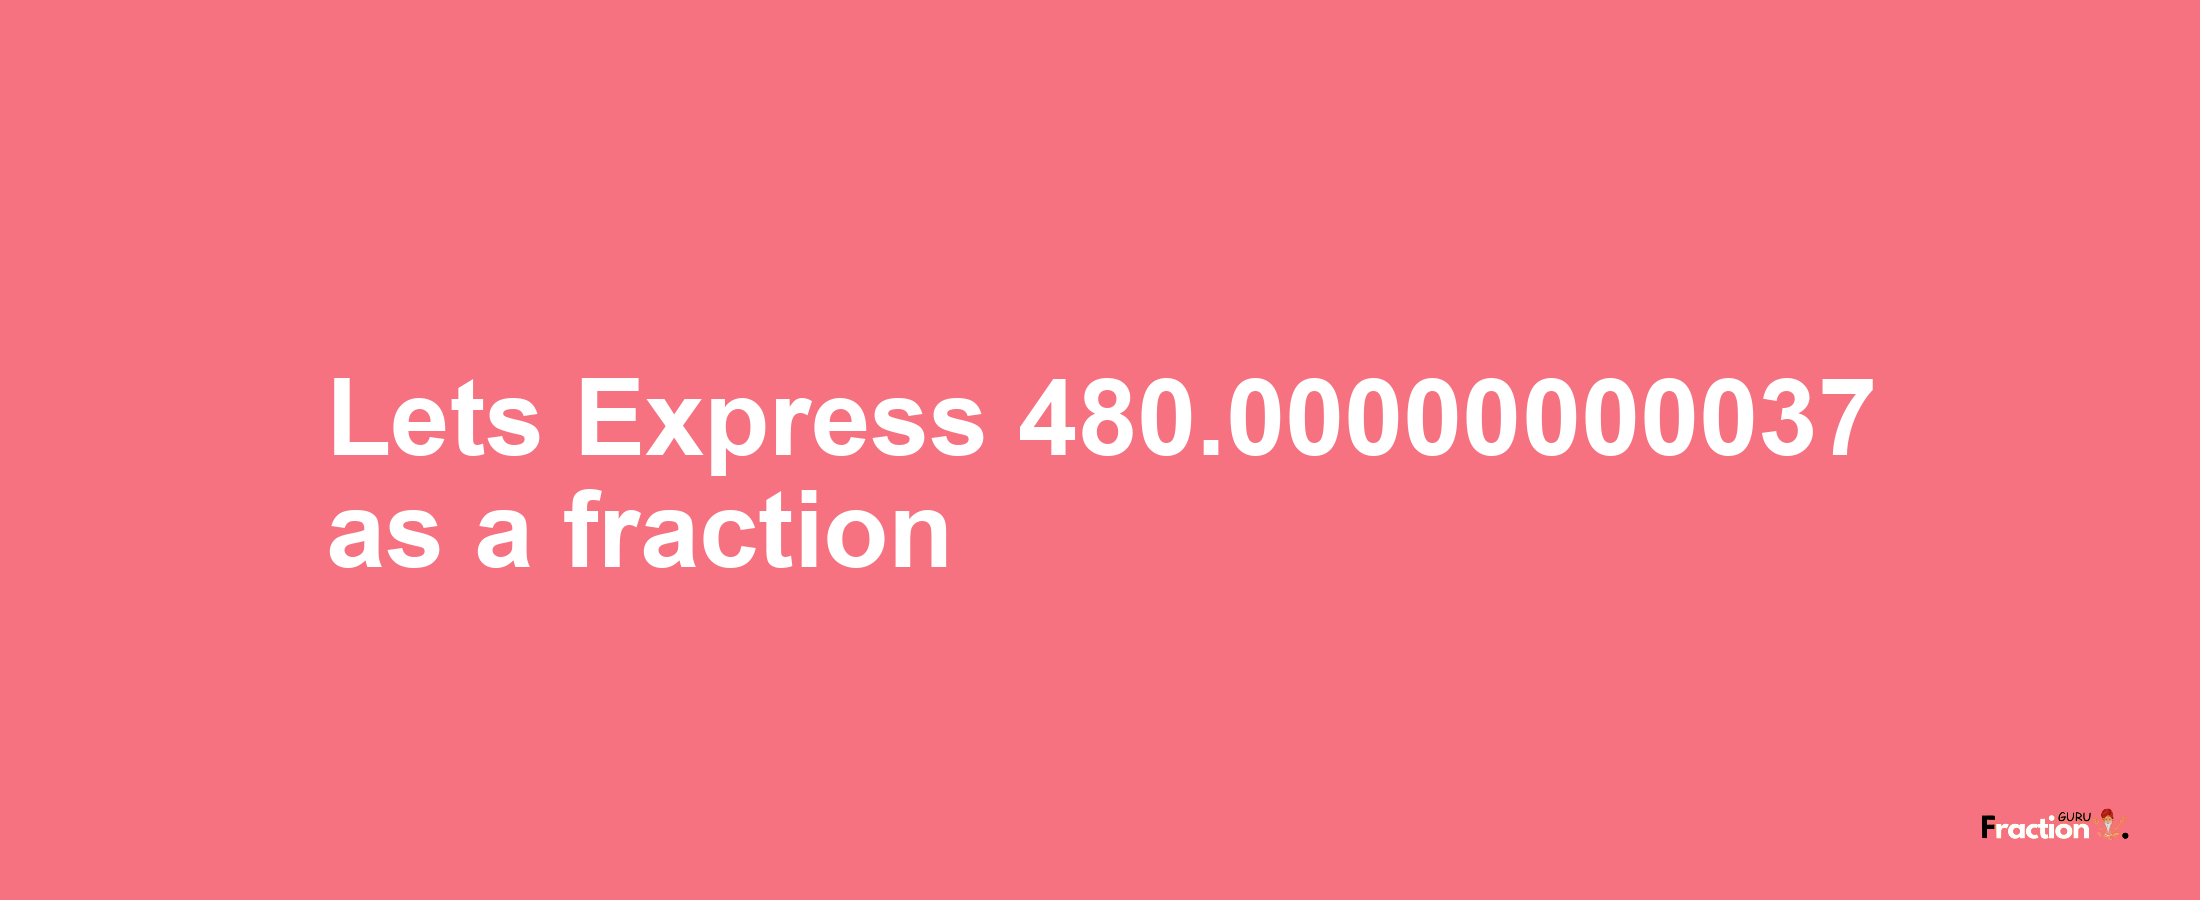 Lets Express 480.00000000037 as afraction